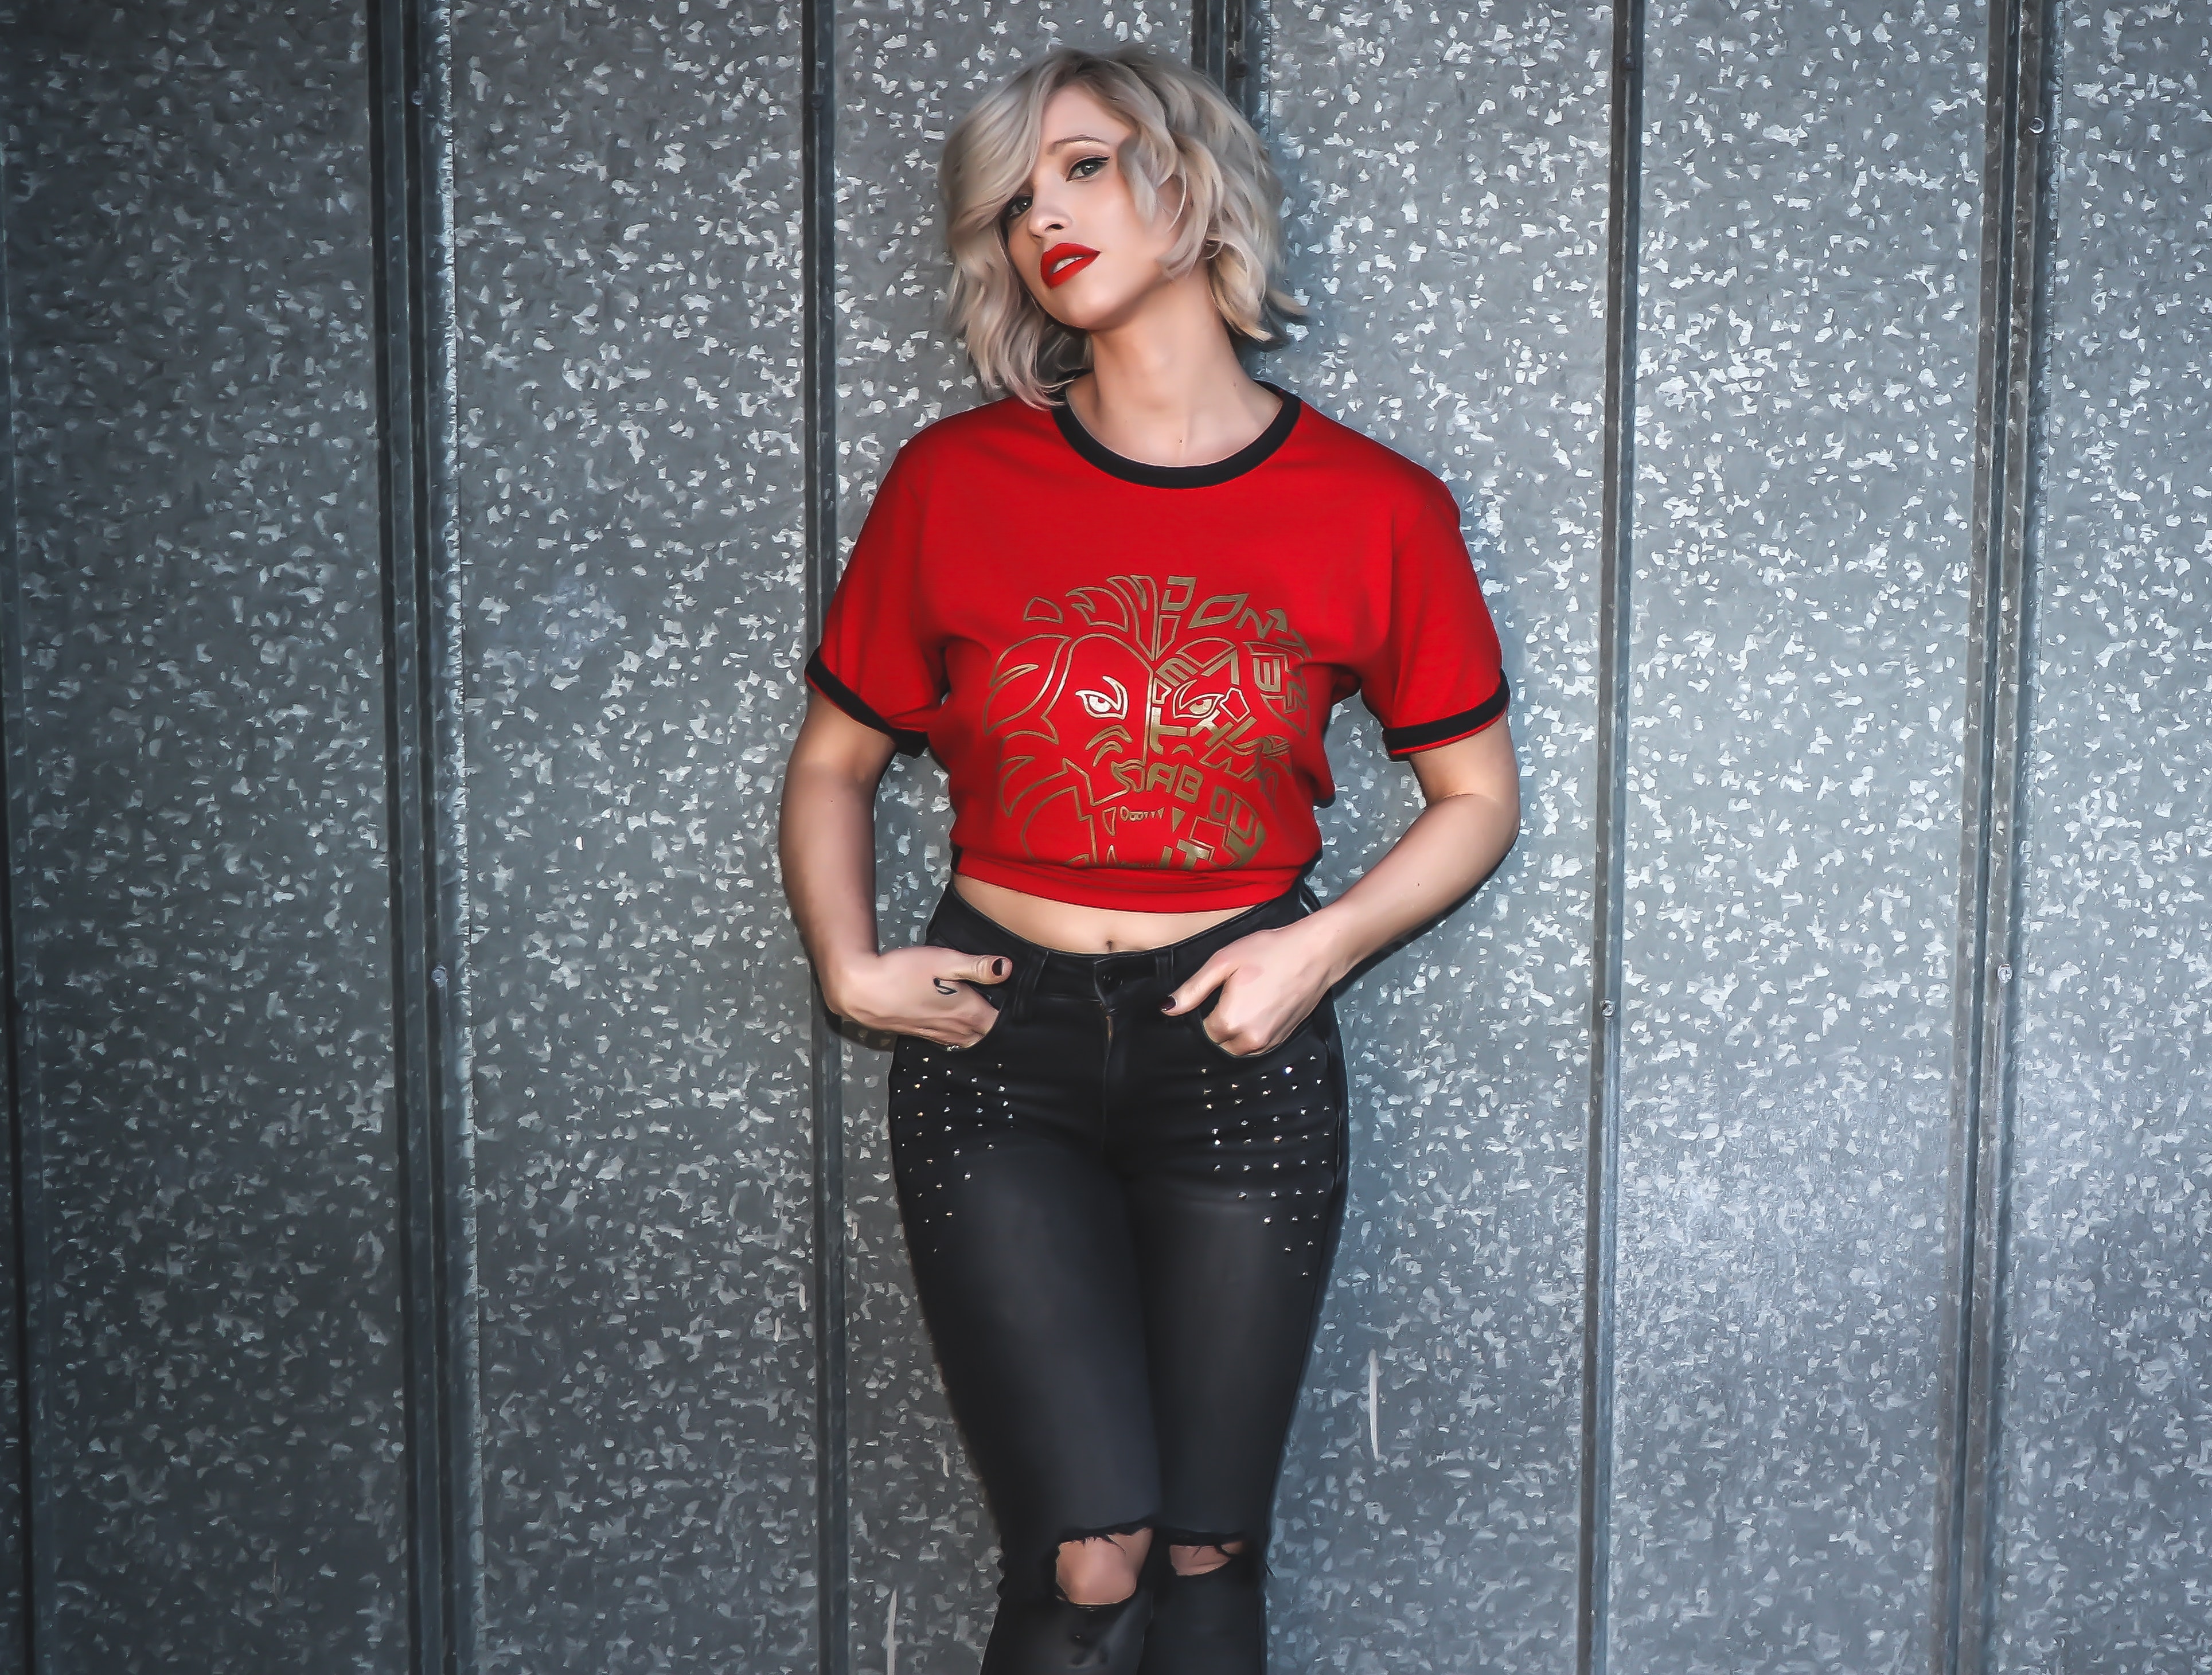 Free photo: Woman in Red Crew-neck T-shirt - Pants, Woman, Wear - Free ...